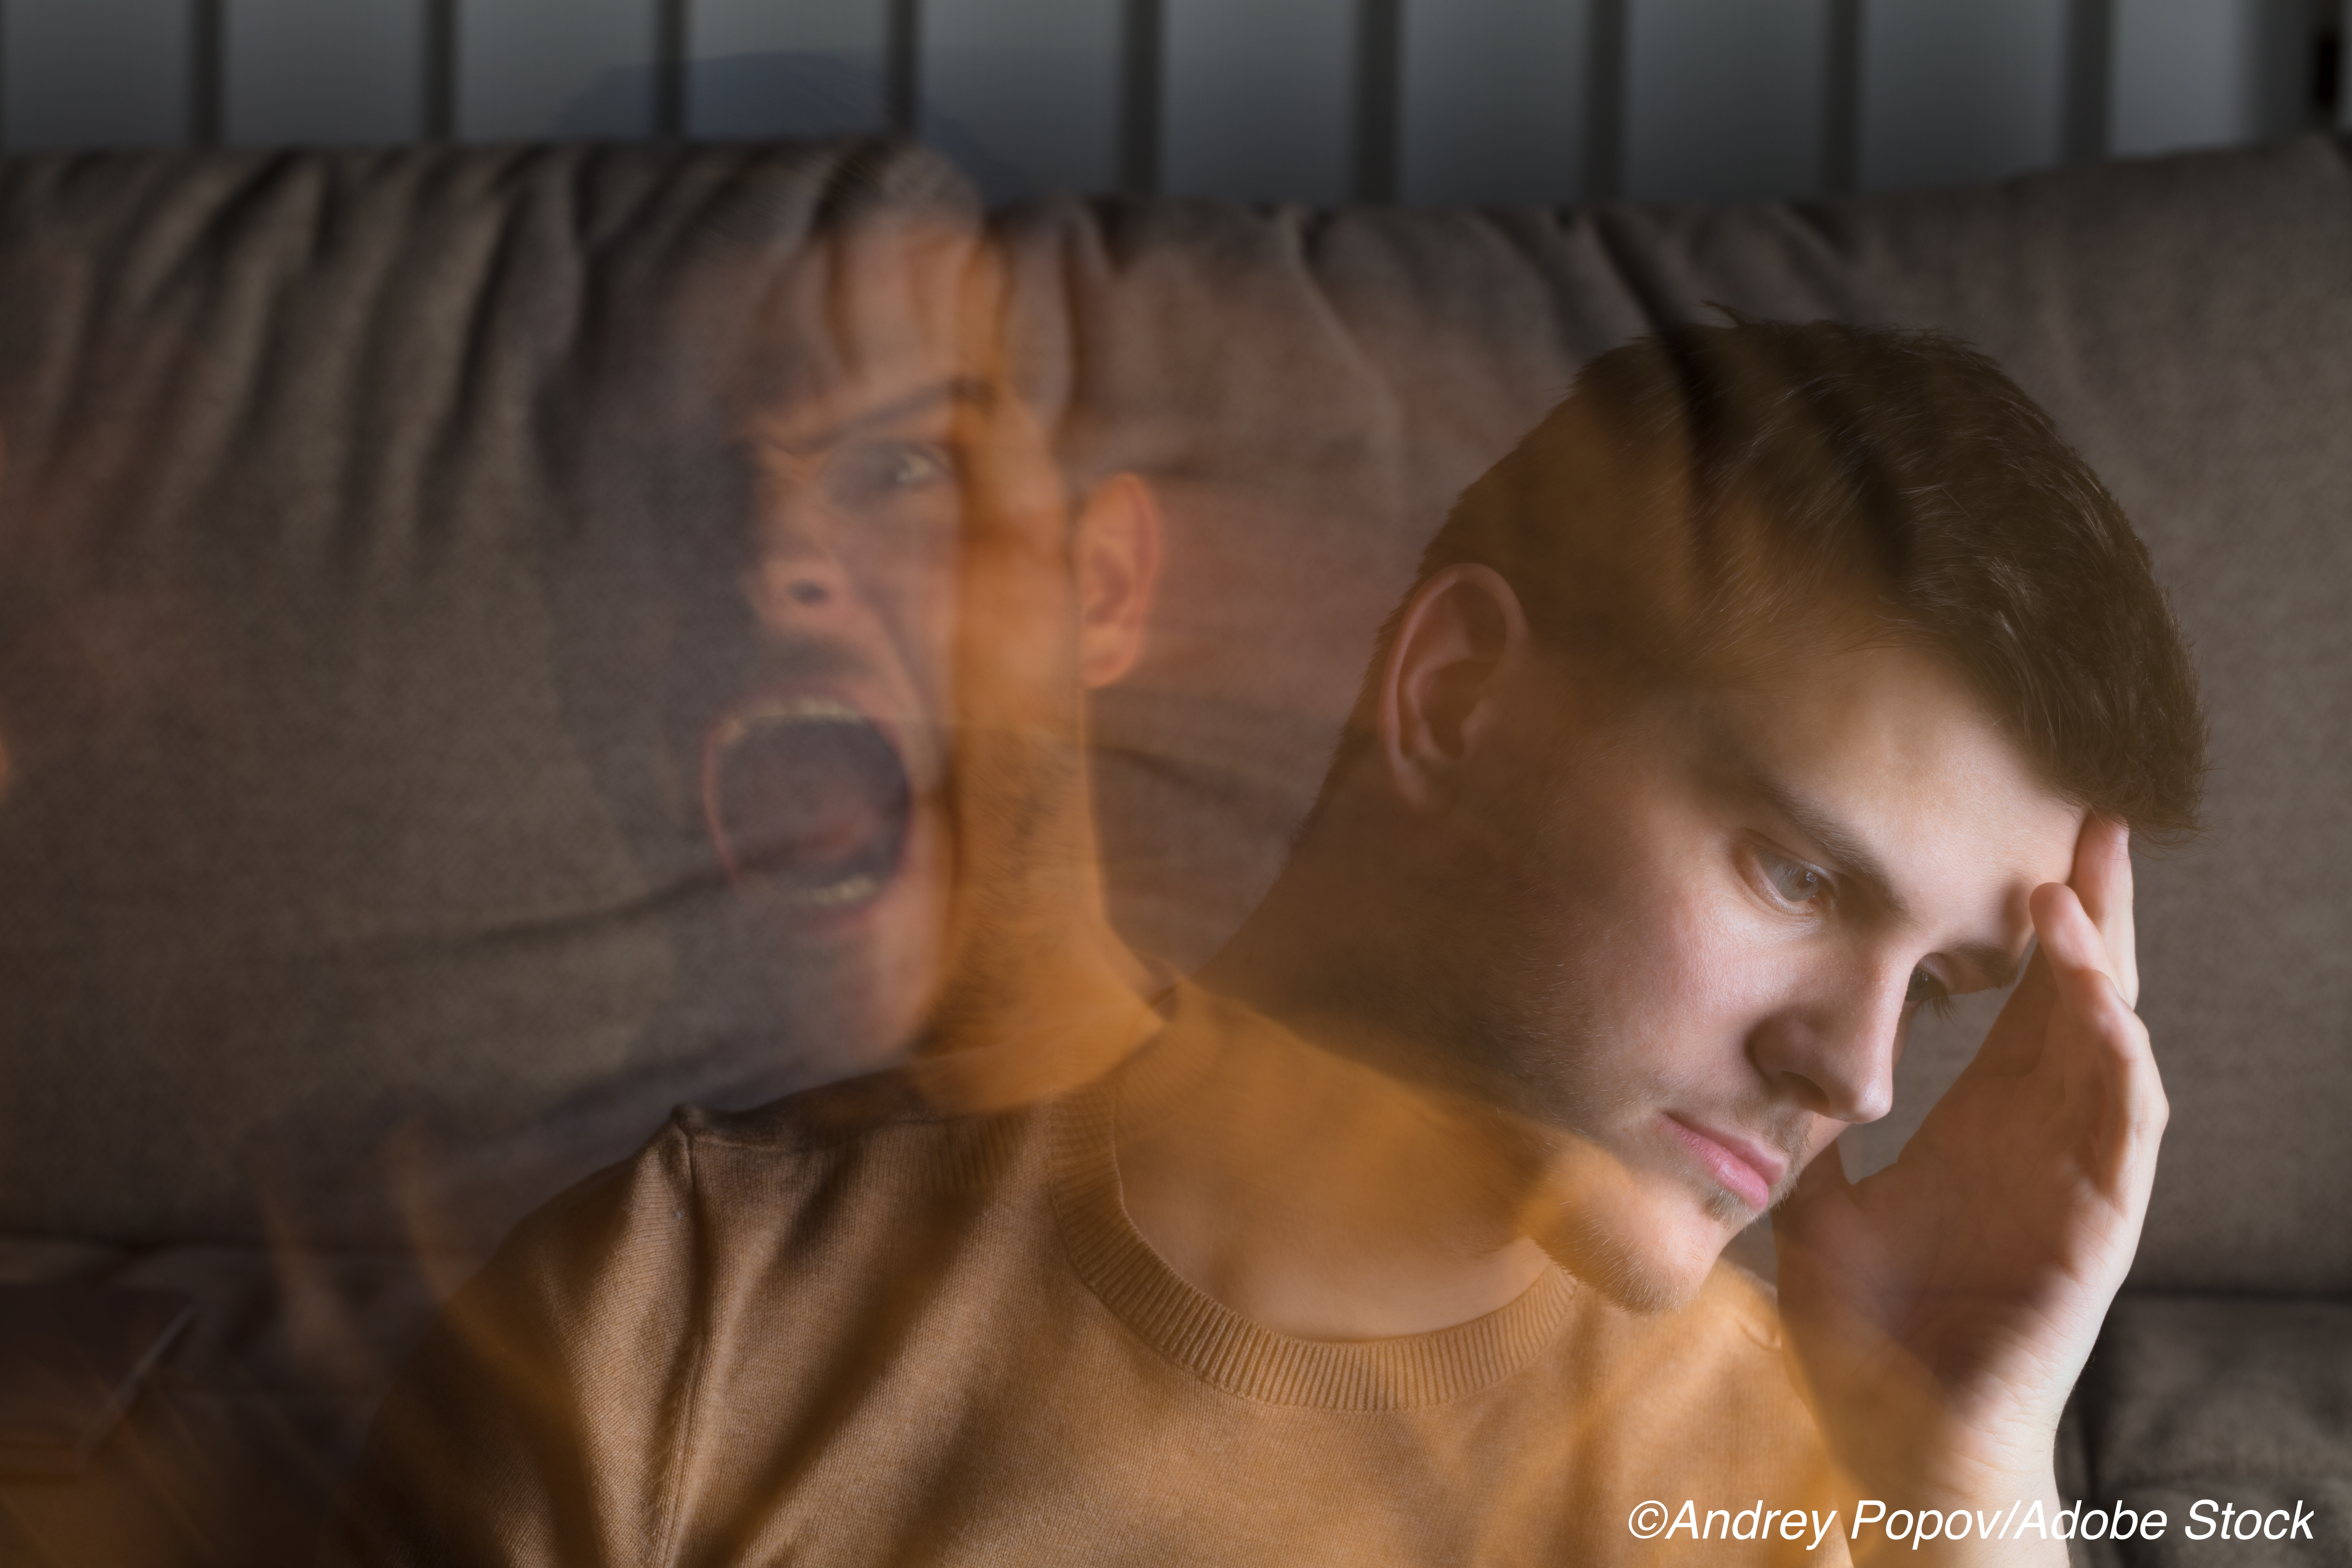 Psychosocial Therapy Add-On May Aid Bipolar Patients